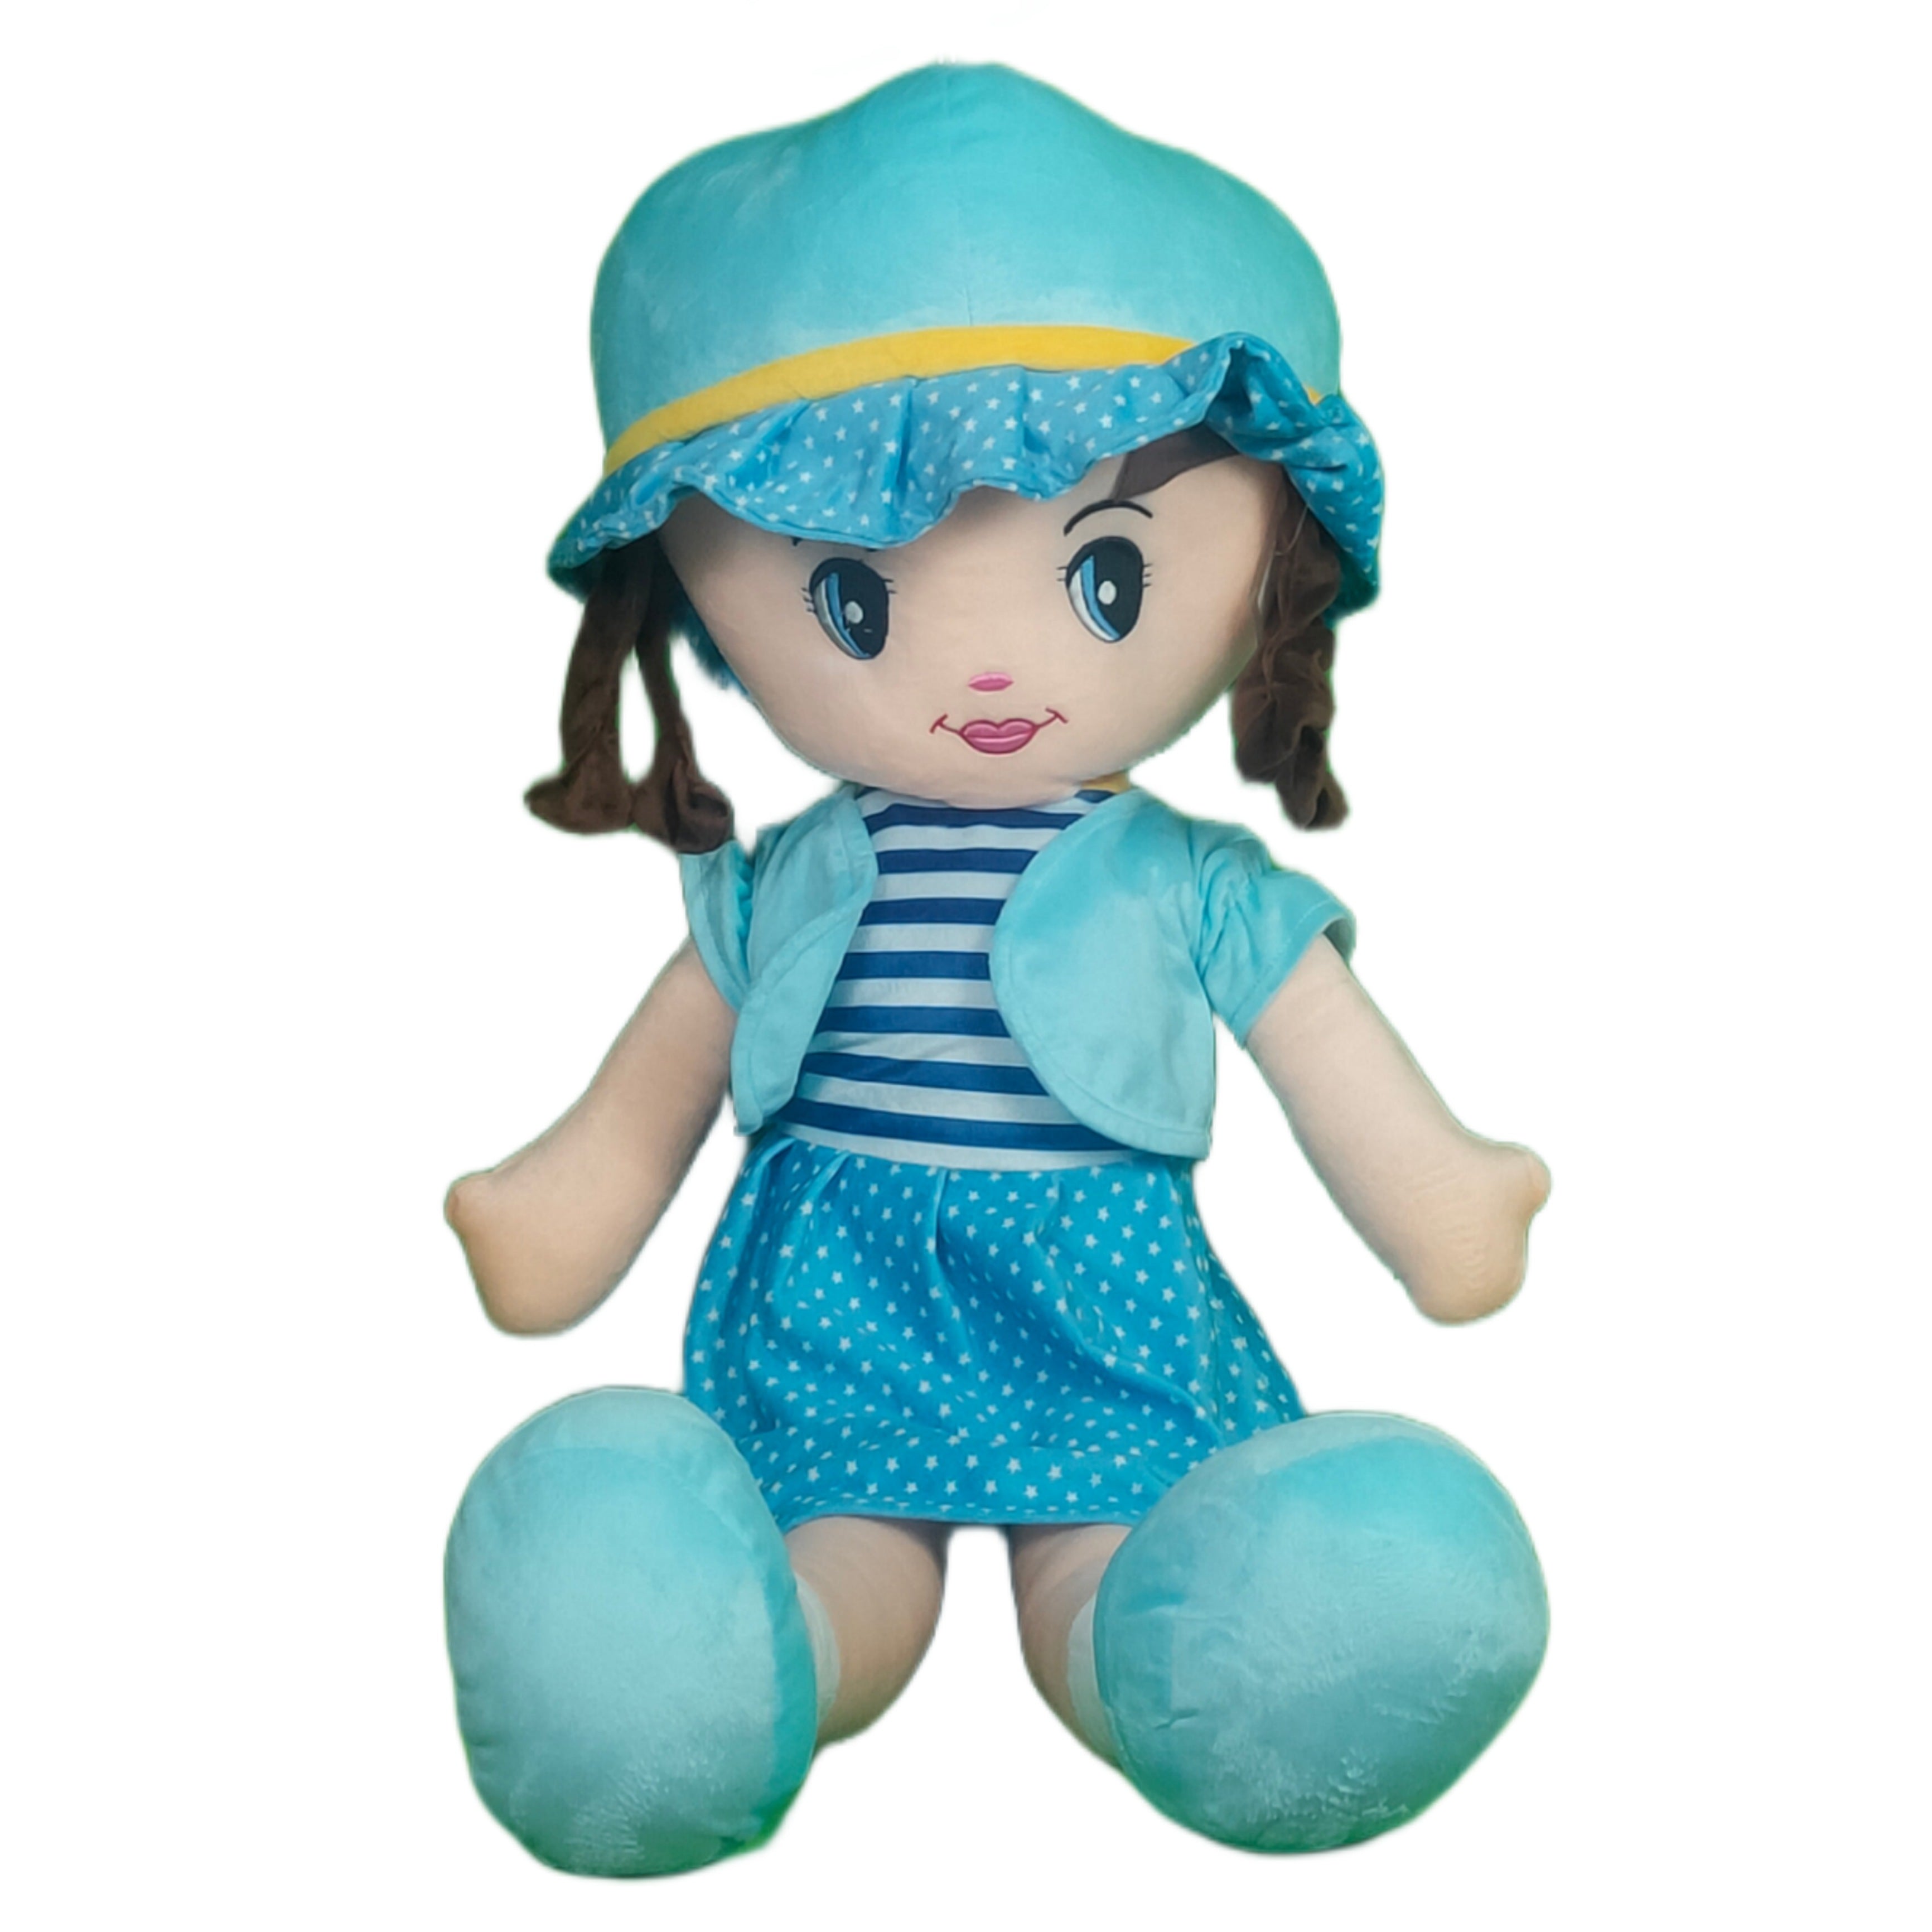 Play Hour Winky Rag Doll Plush Soft Toy Wearing Sky Dress for Ages 3 Years and Up, 100cm